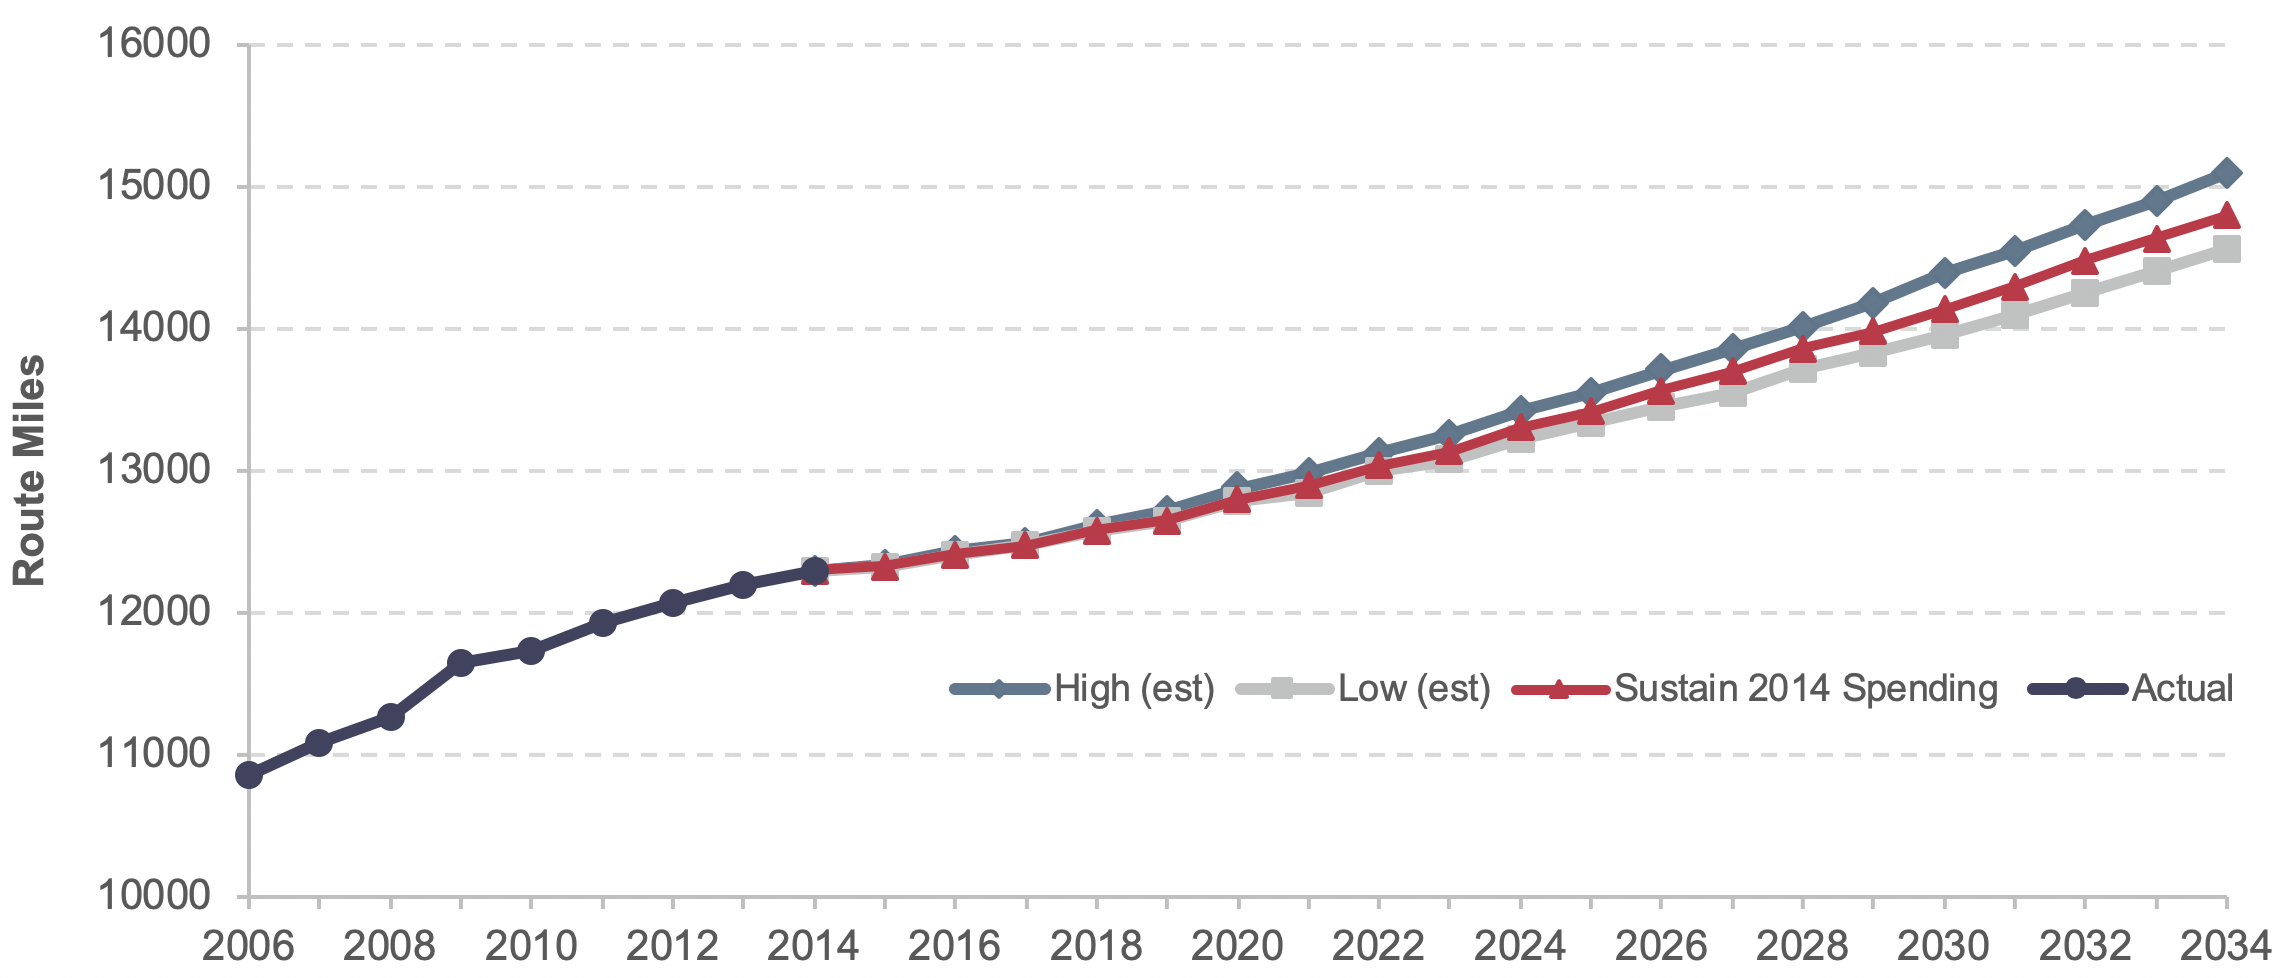 A line graph plots values for road mile count over time from 2006 to 2034 for four scenarios. The plot for actual mile count extends from a value of 10,865 in the year 2006 to a value of 12,298 in the year 2014. Remaining plots extend from this value. The plot for the high(est) growth scenario extend to a value of 15,100 in the year 2034. The plot for the low(est) growth scenario extends to the value 14,560 in the year 2034. The plot for the sustain 2014 spending scenario extends to a value of 14,802 in the year 2034. Source: Transit Economic Requirements Model.